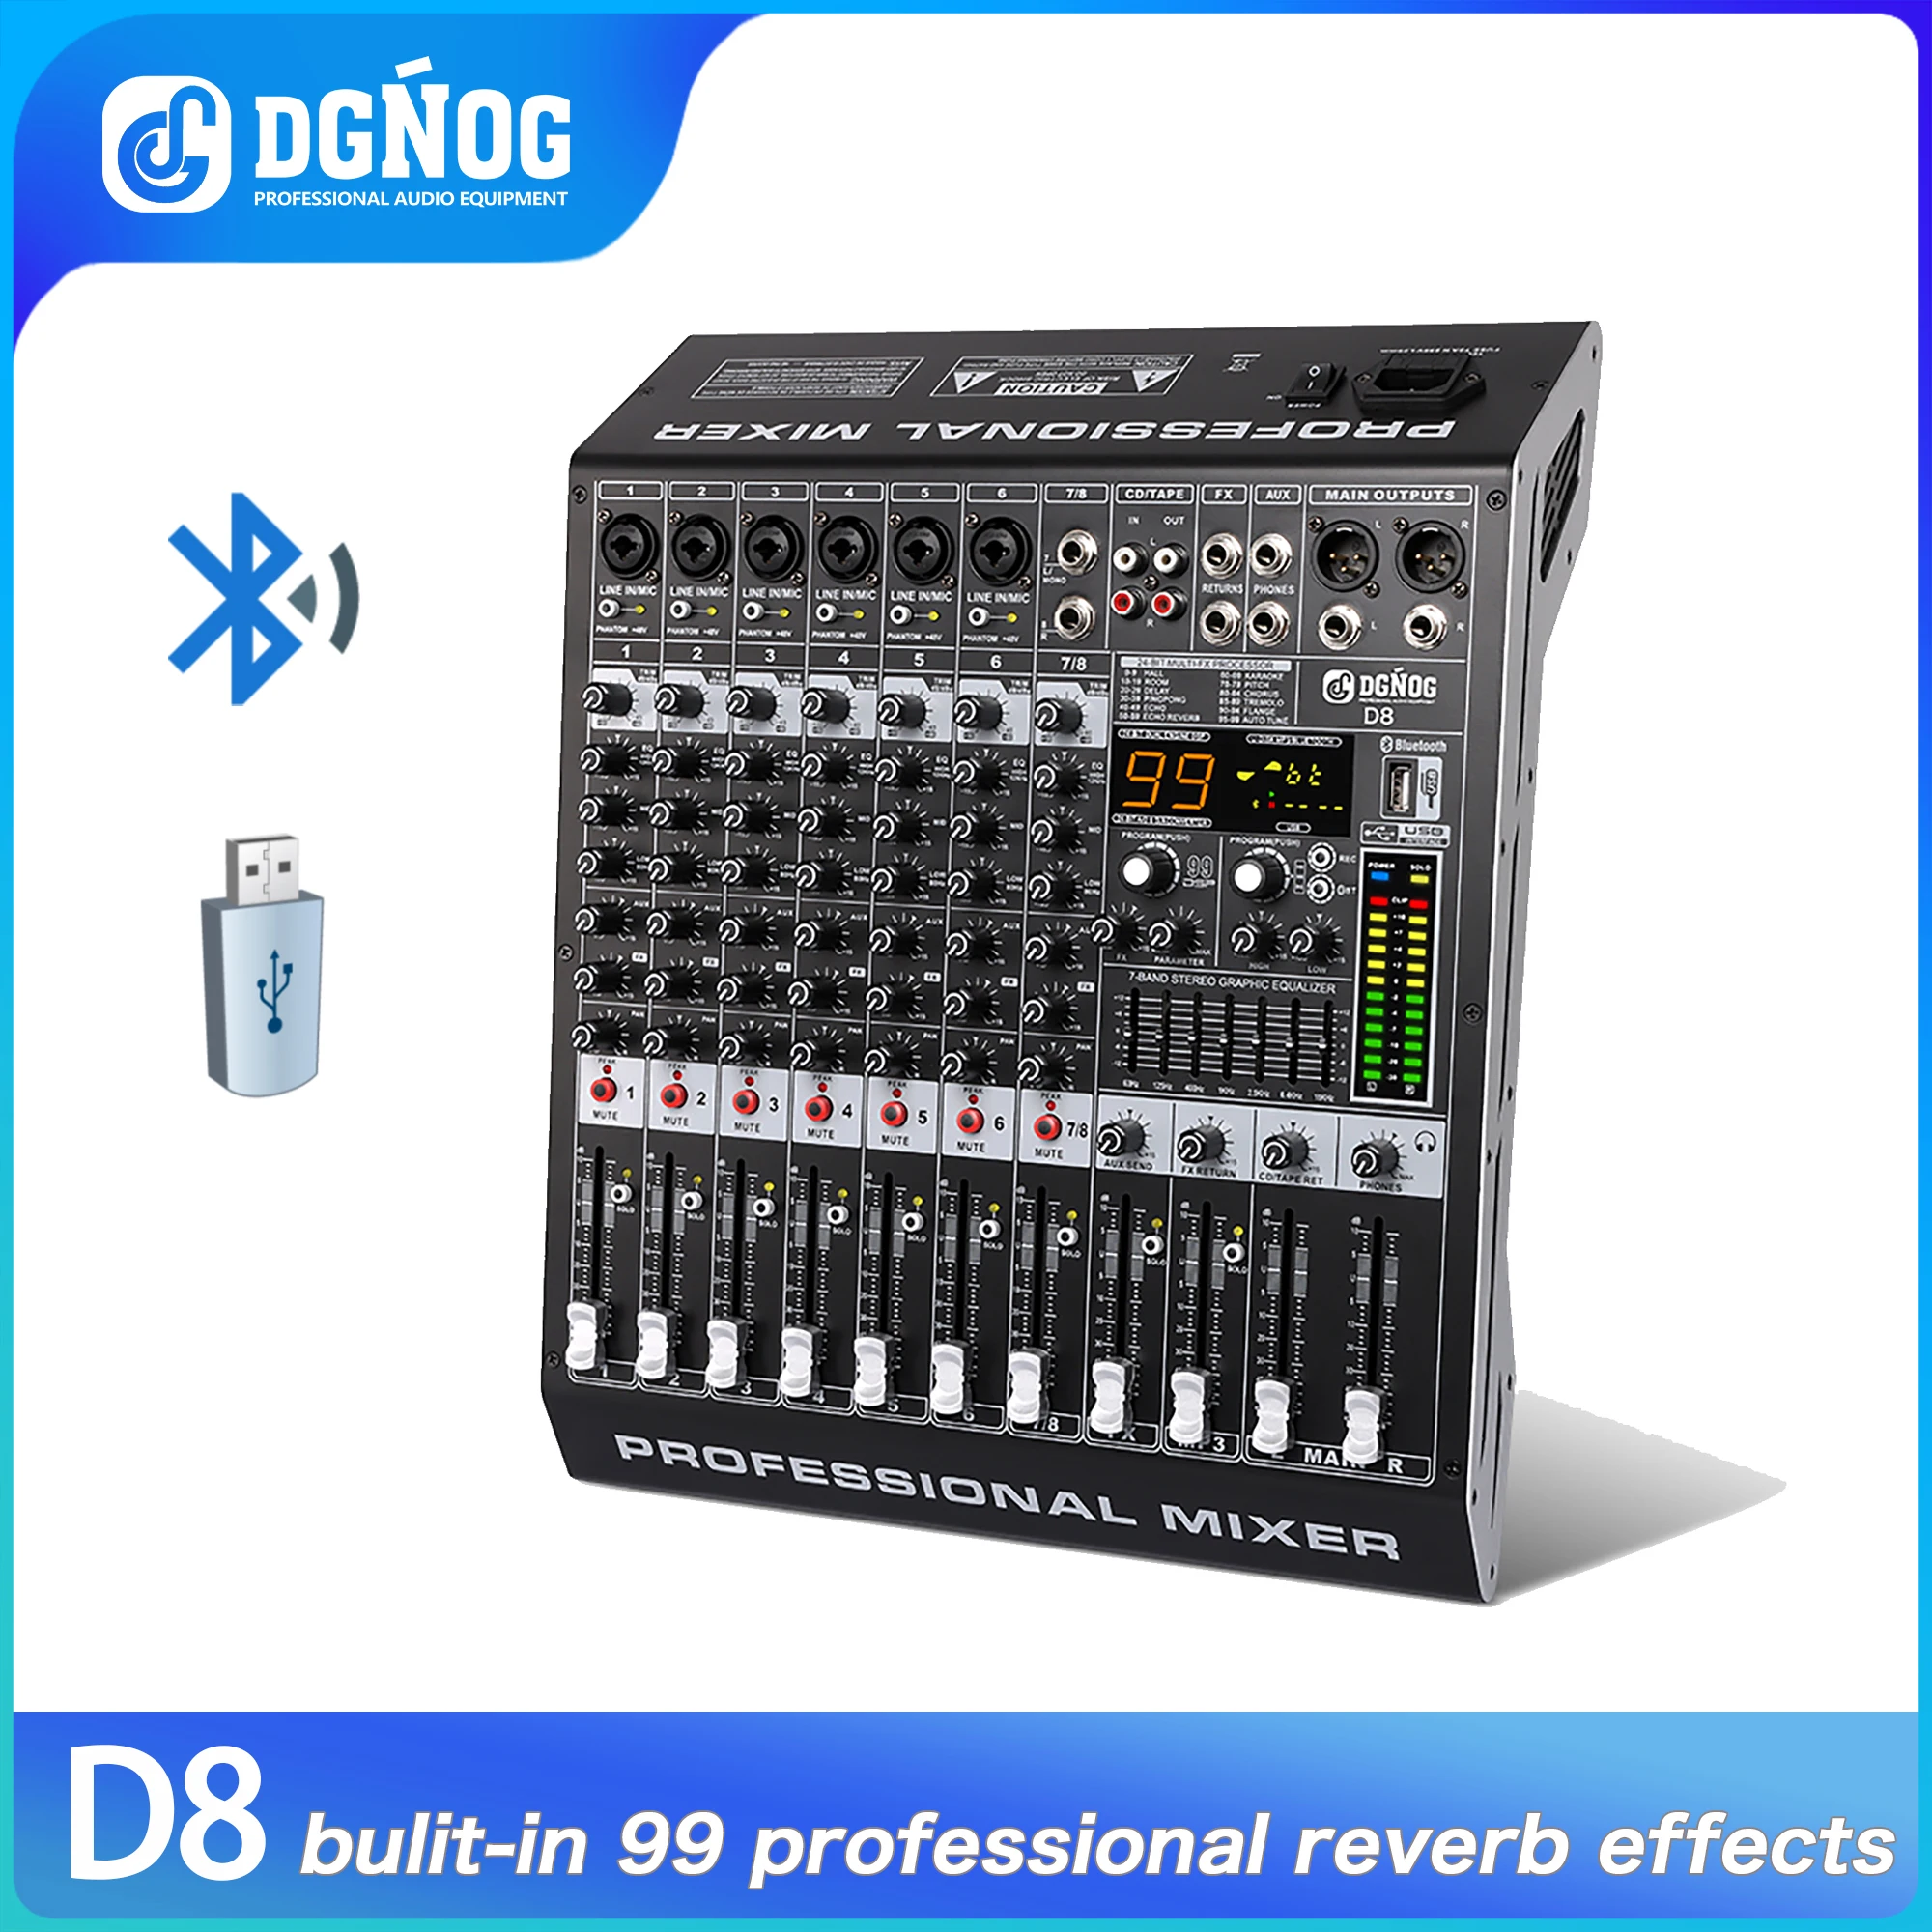 

DGNOG Audio Mixer D8 8-channel 99 DSP 48V Professional Effector with Bluebooth USB for Home Karaoke and Studio Recording